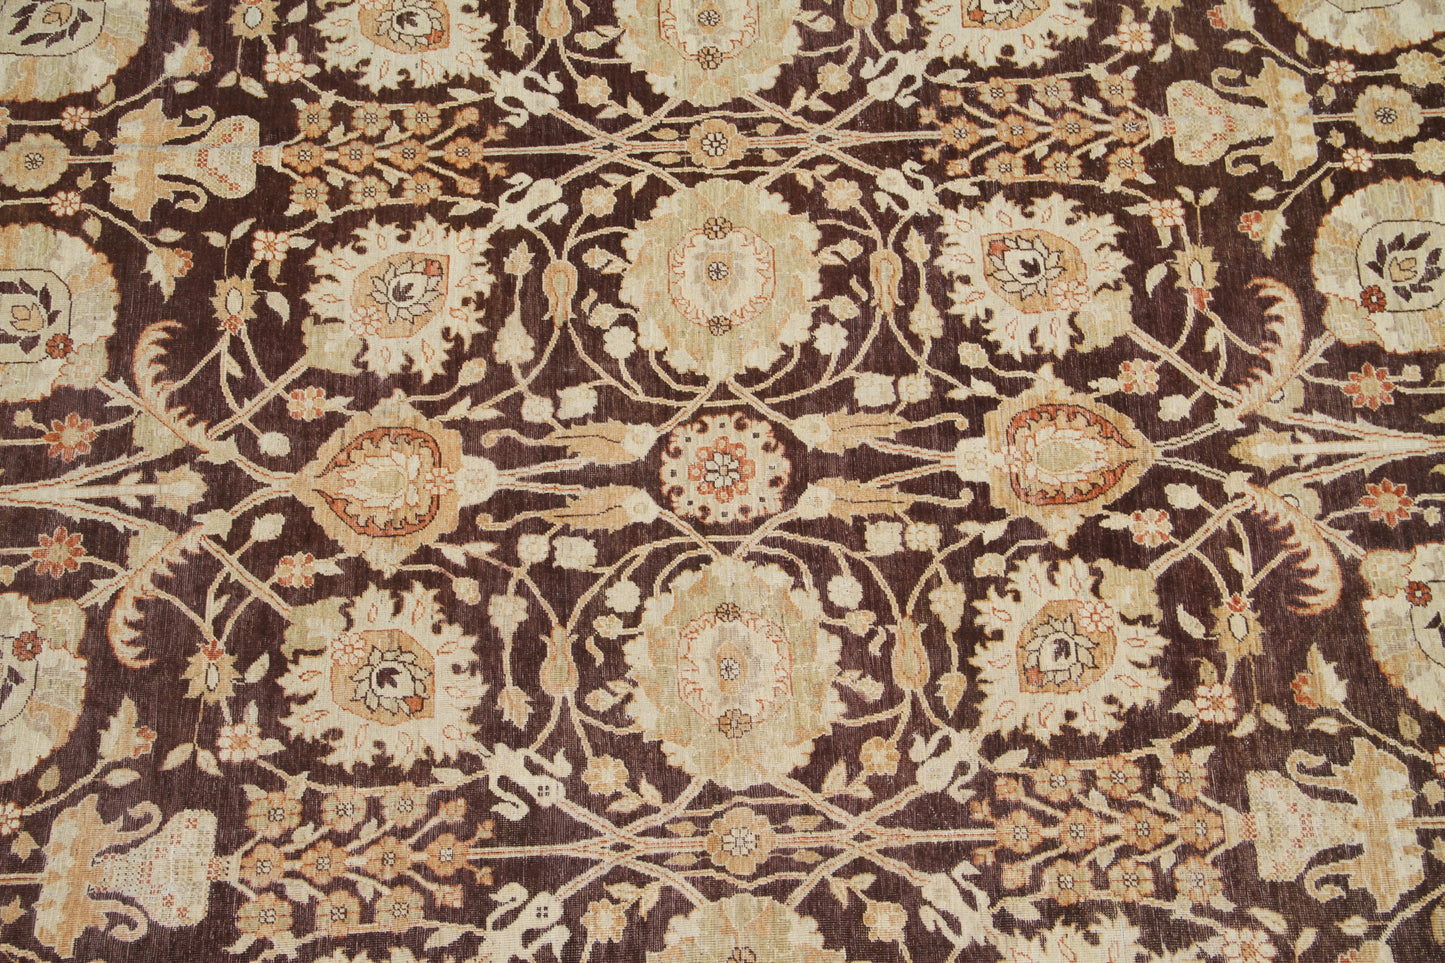 13x19 Large Sultanabad Design Ariana Traditional Rug